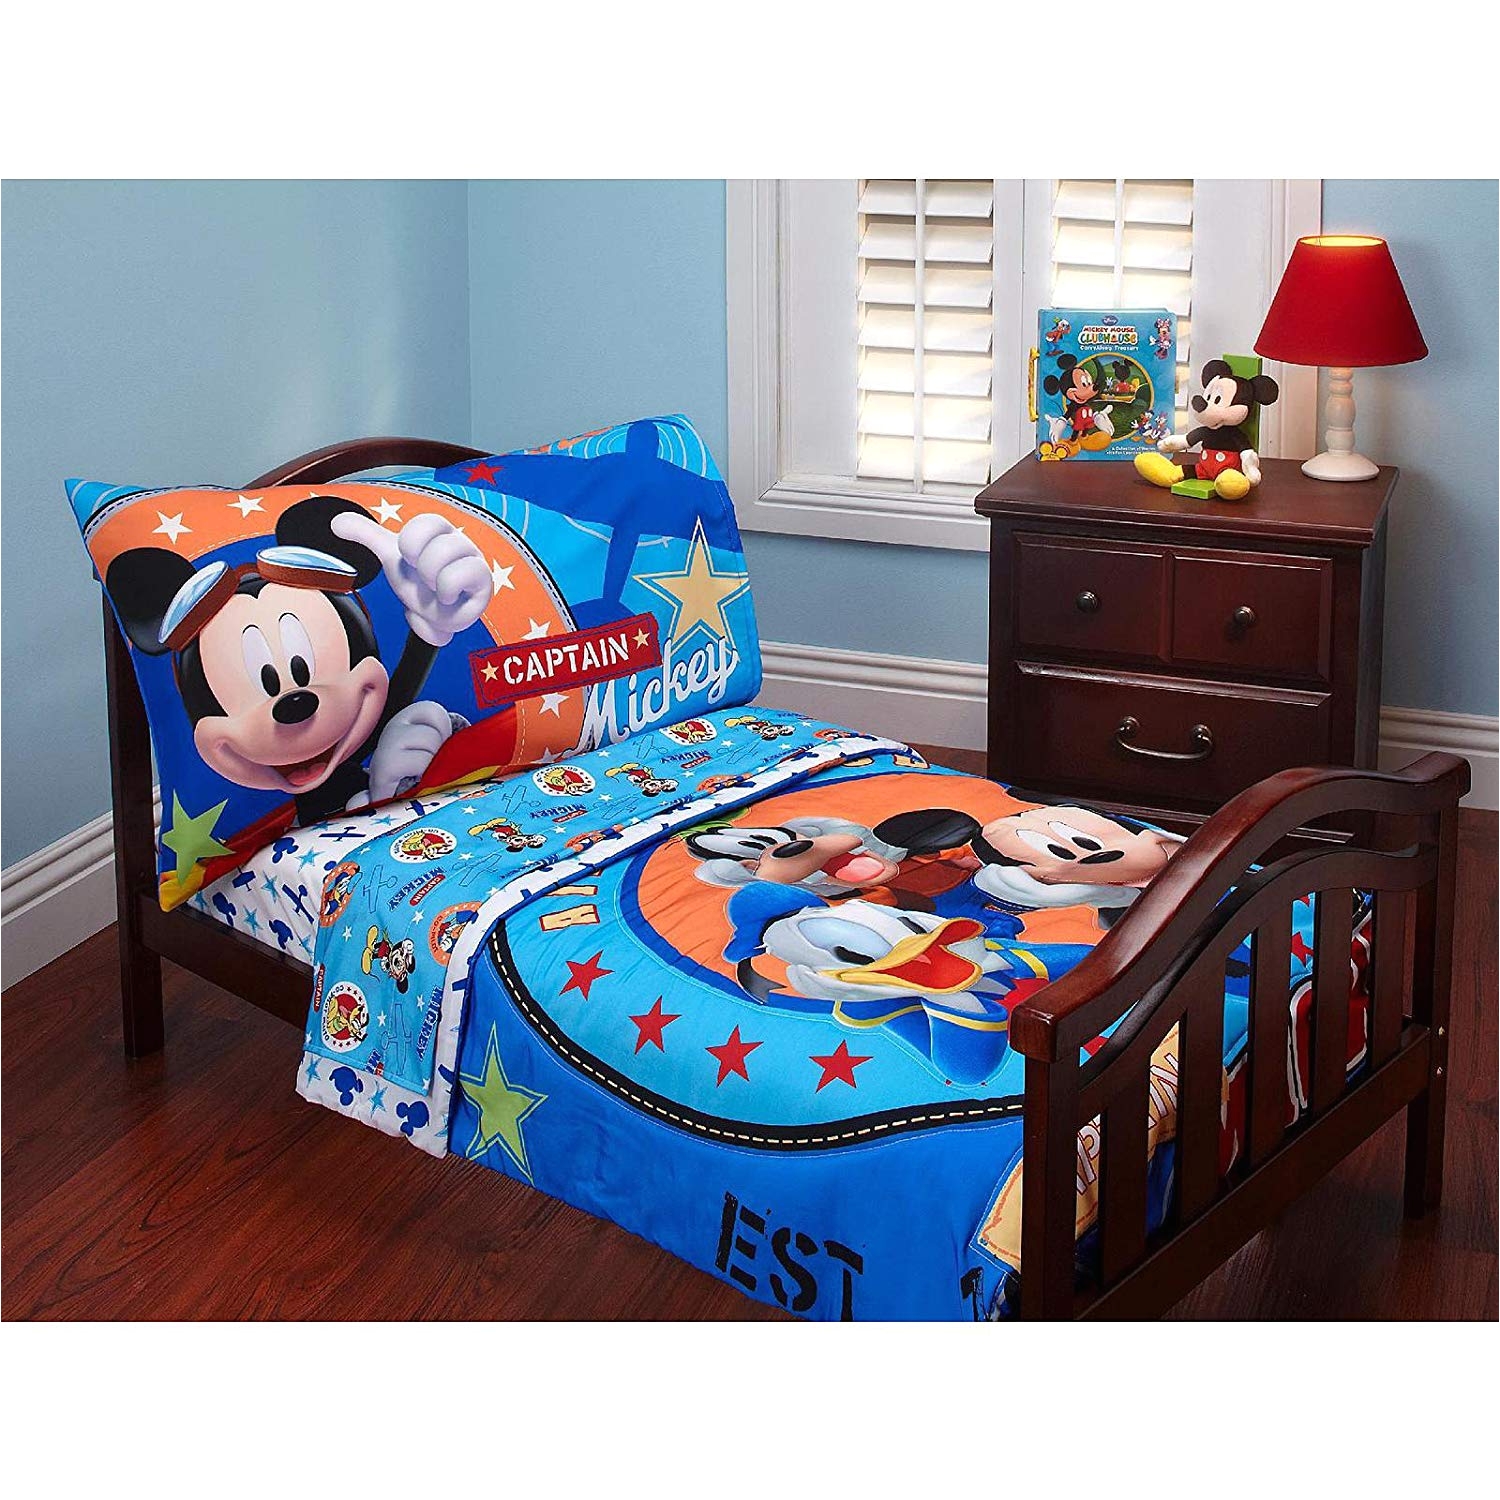 amazon com baby mickey mouse toddler bed set comforter top sheet fitted sheet pillow case 4 piece kids bedding set baby